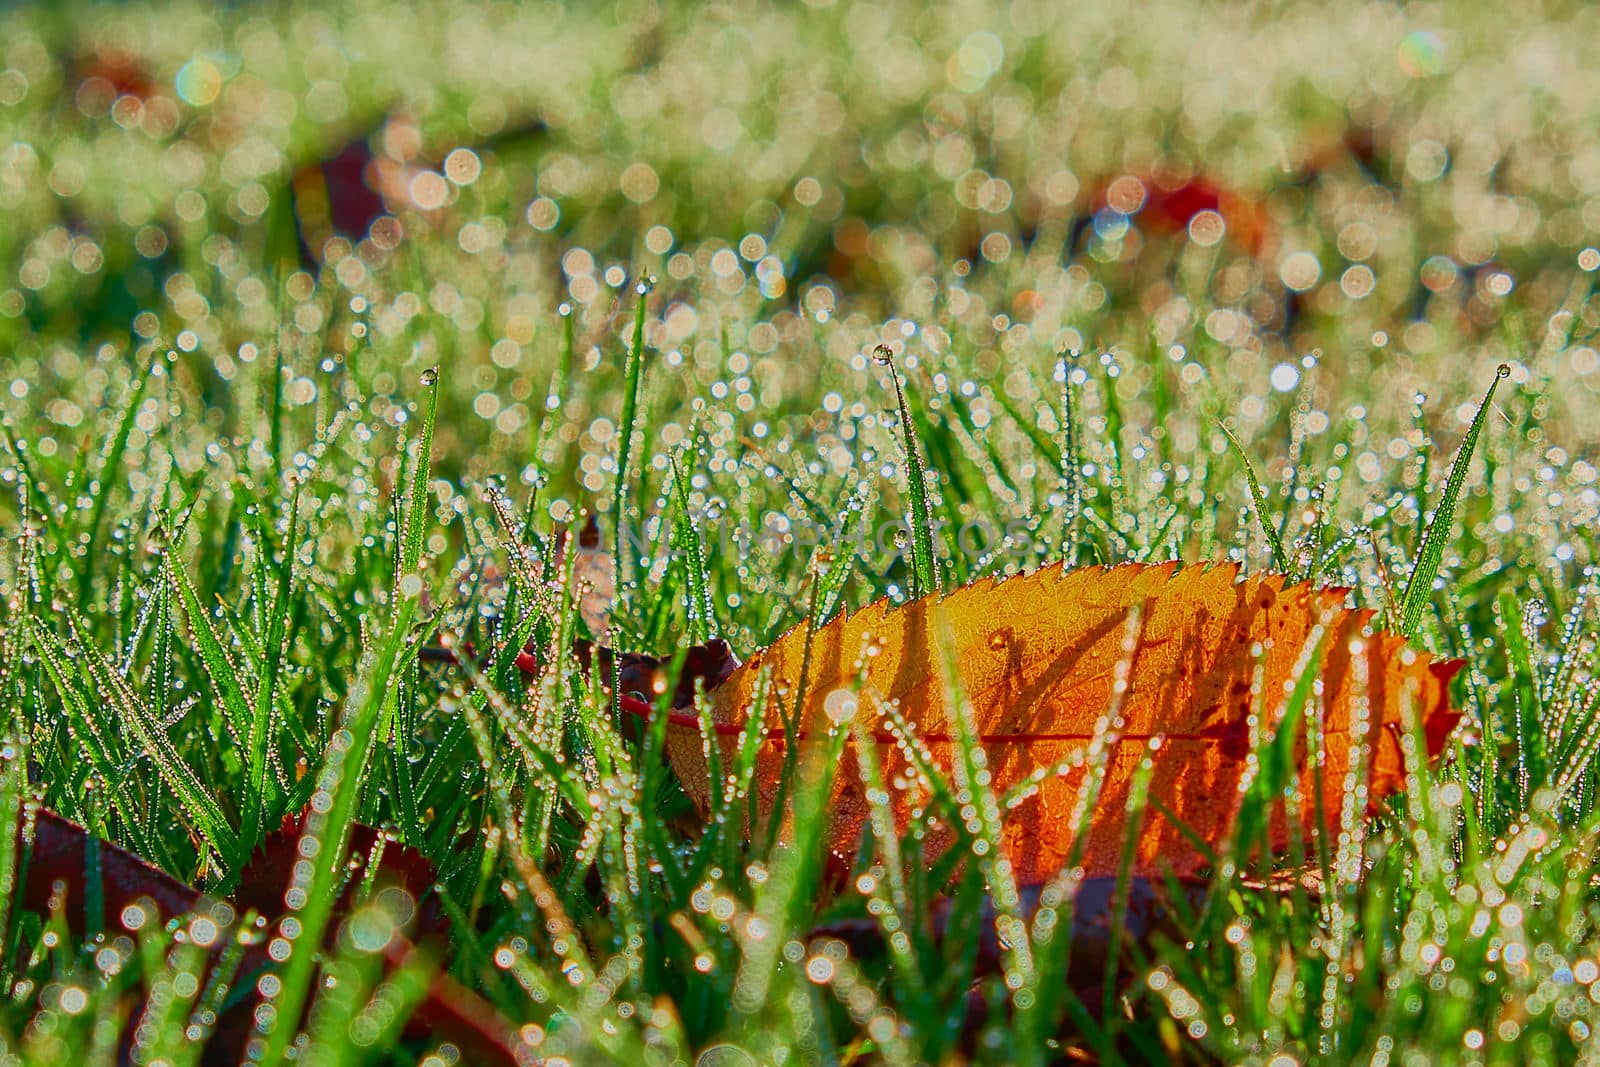 Brown autumn dry leave on ground with water droplets